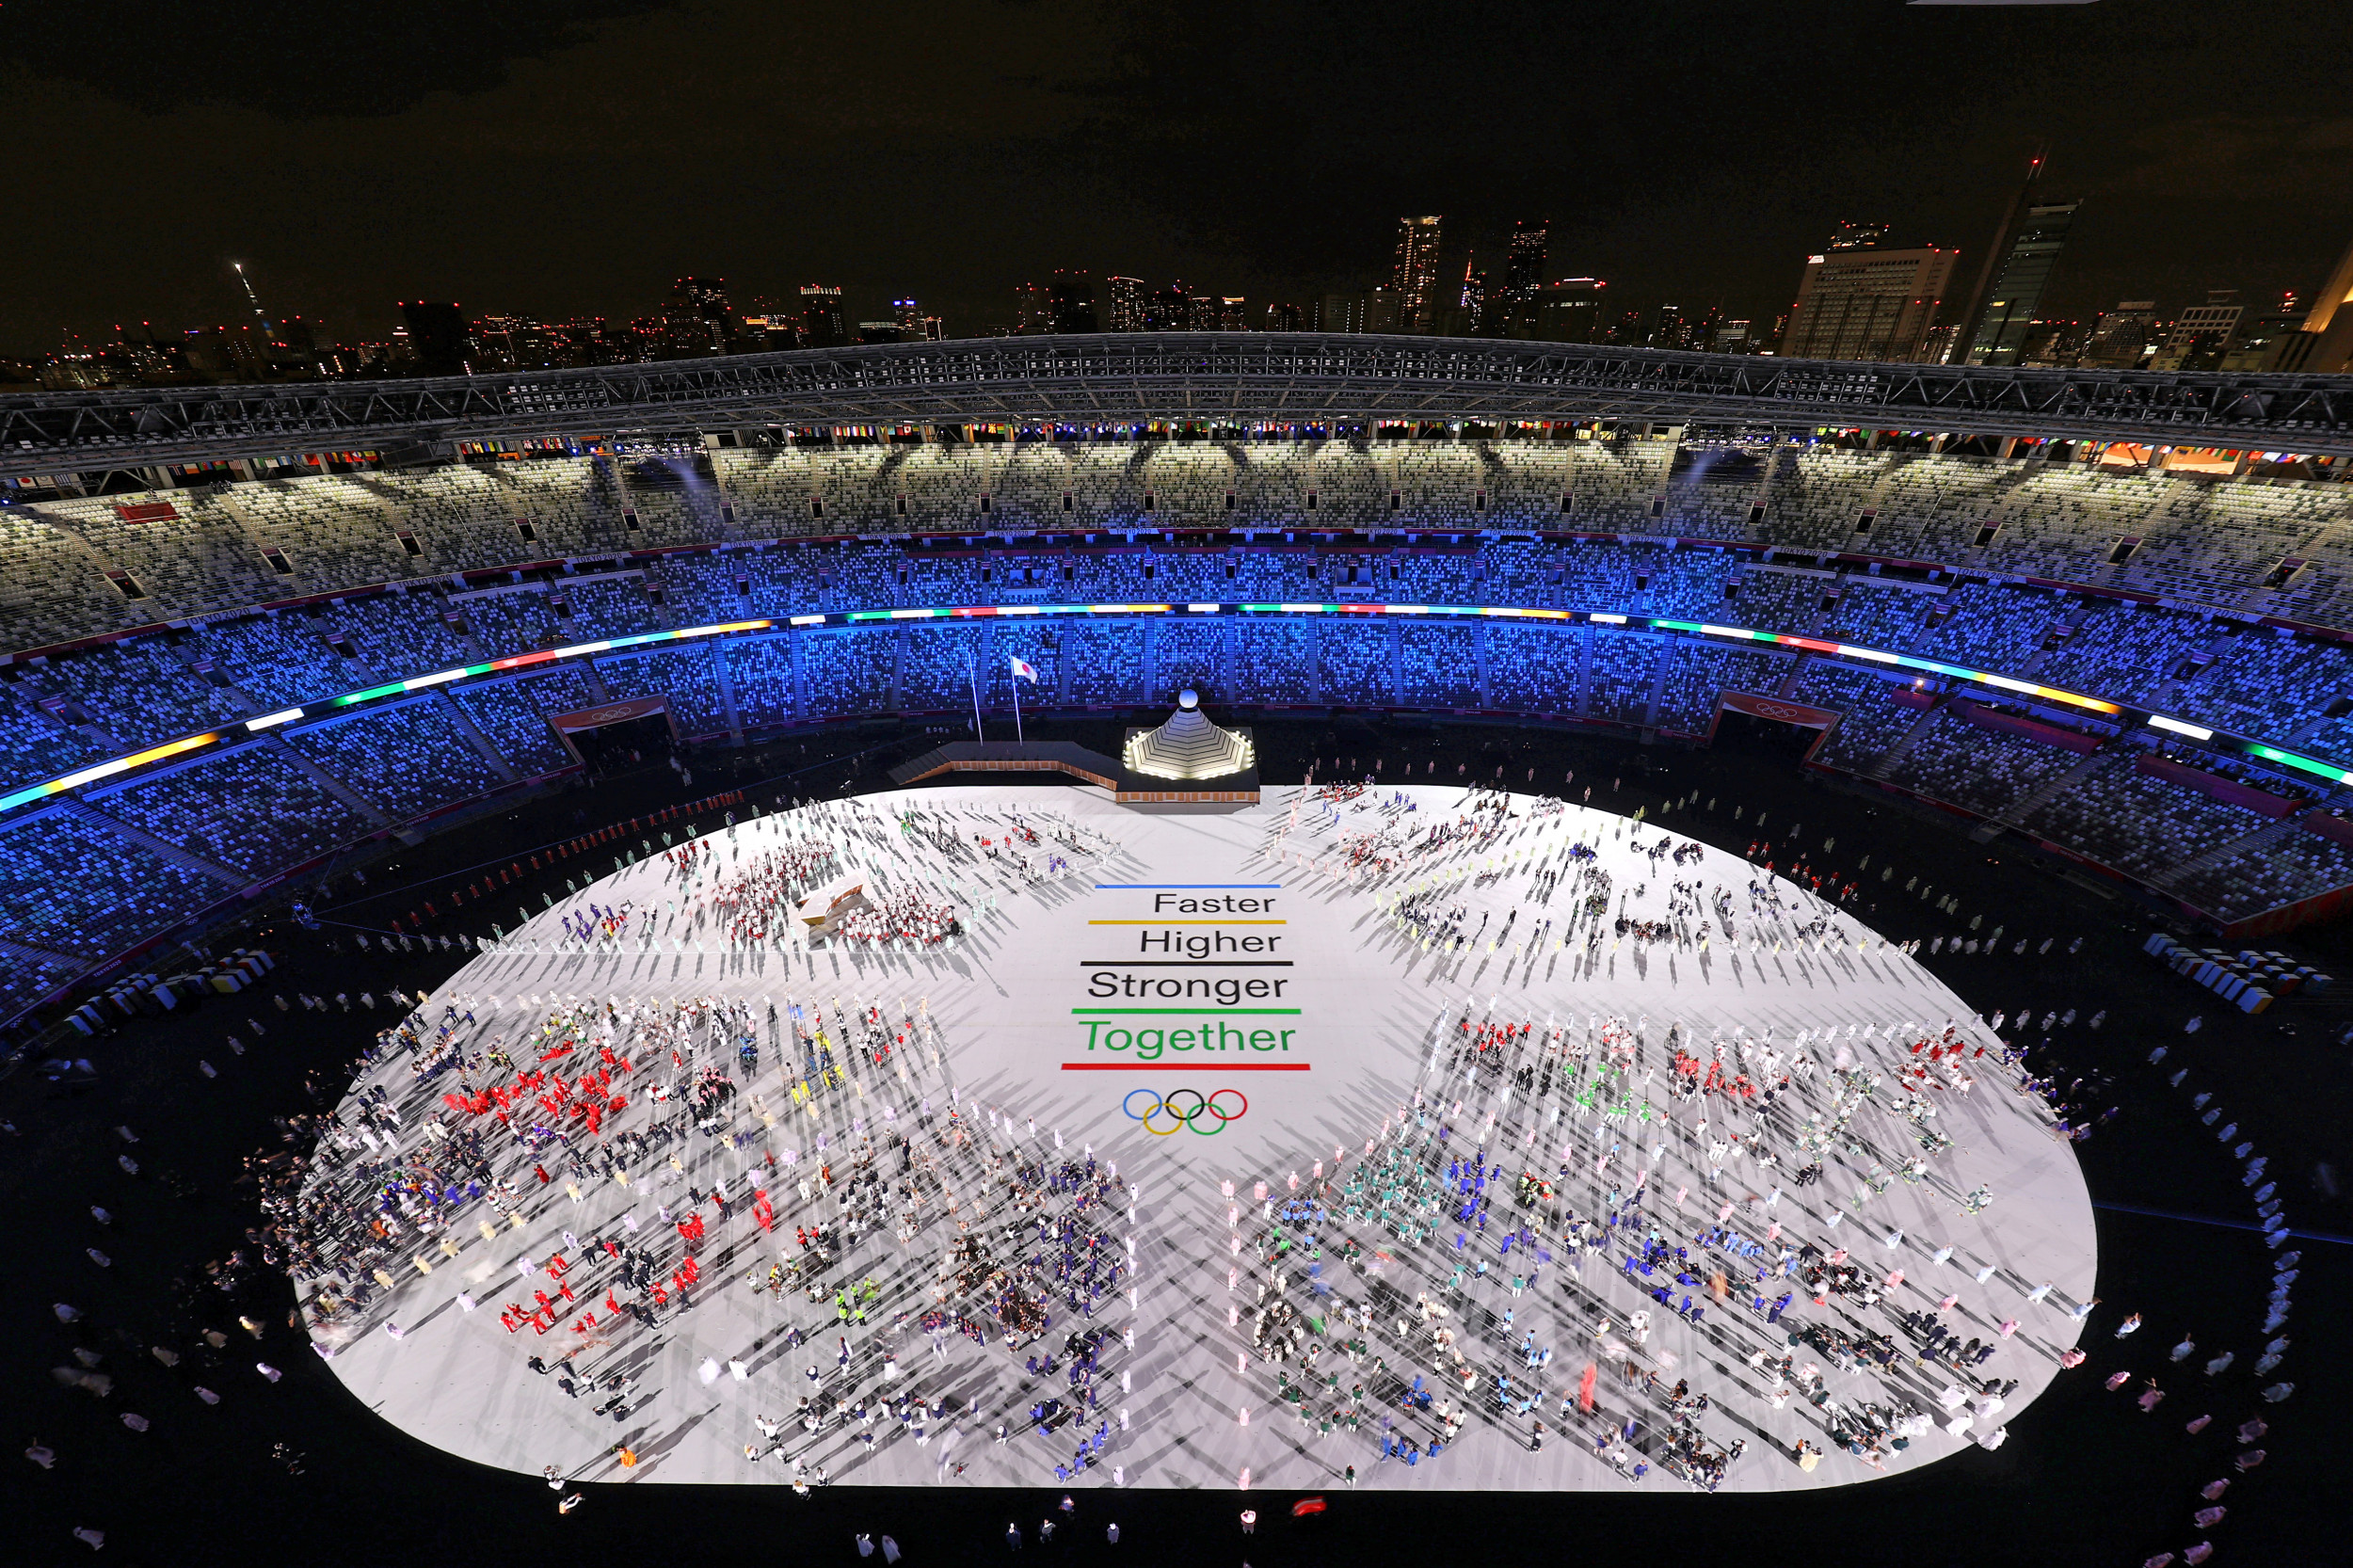 london olympic opening ceremony music list